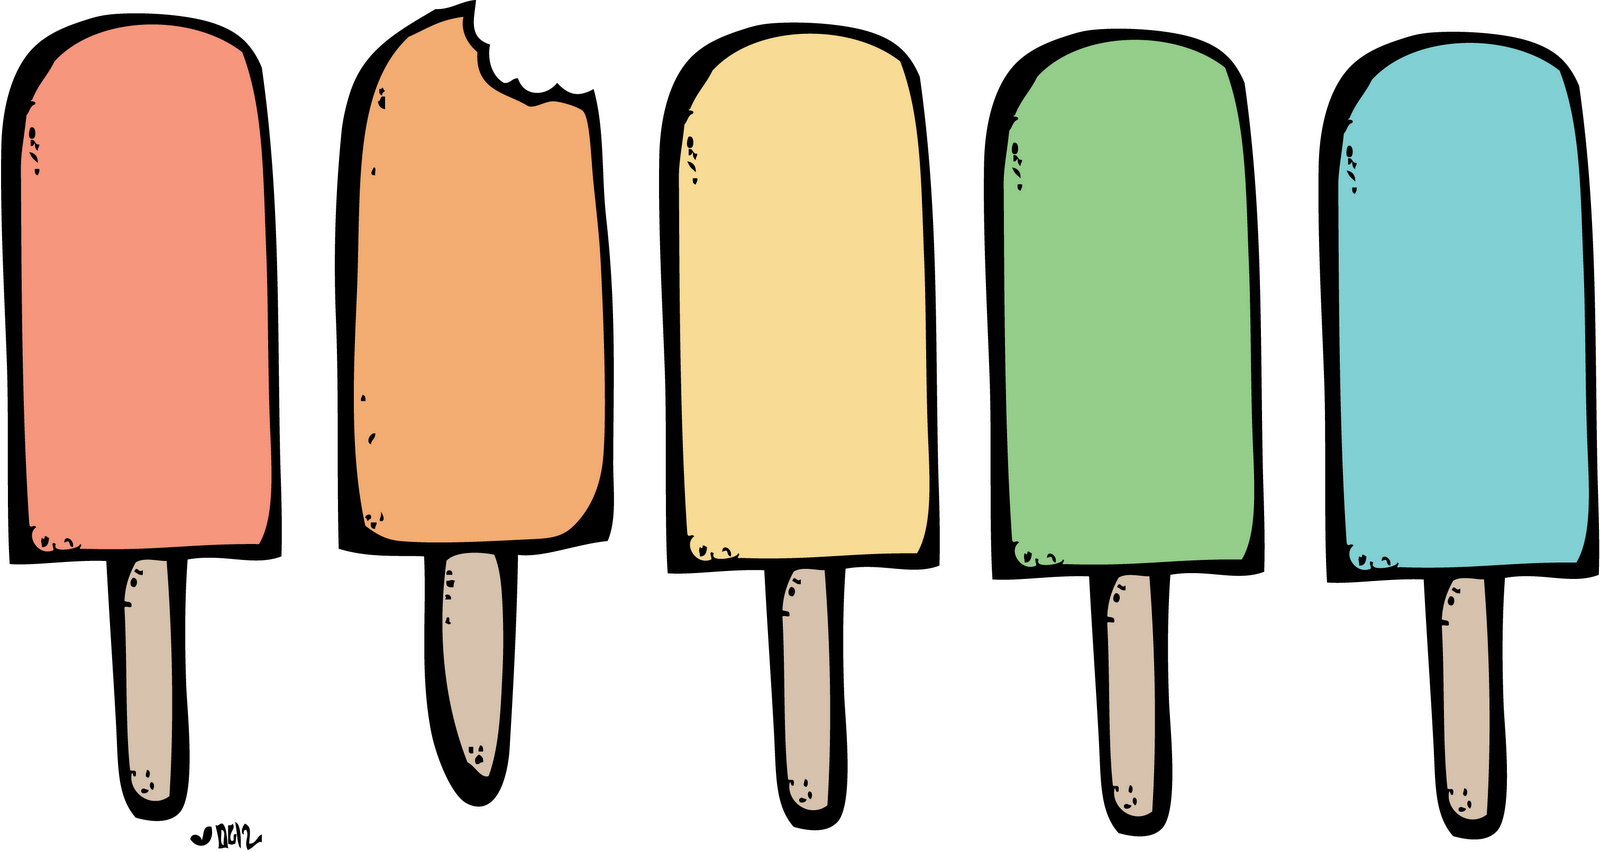 Popsicle Images Illustrations Photos Image Png Clipart